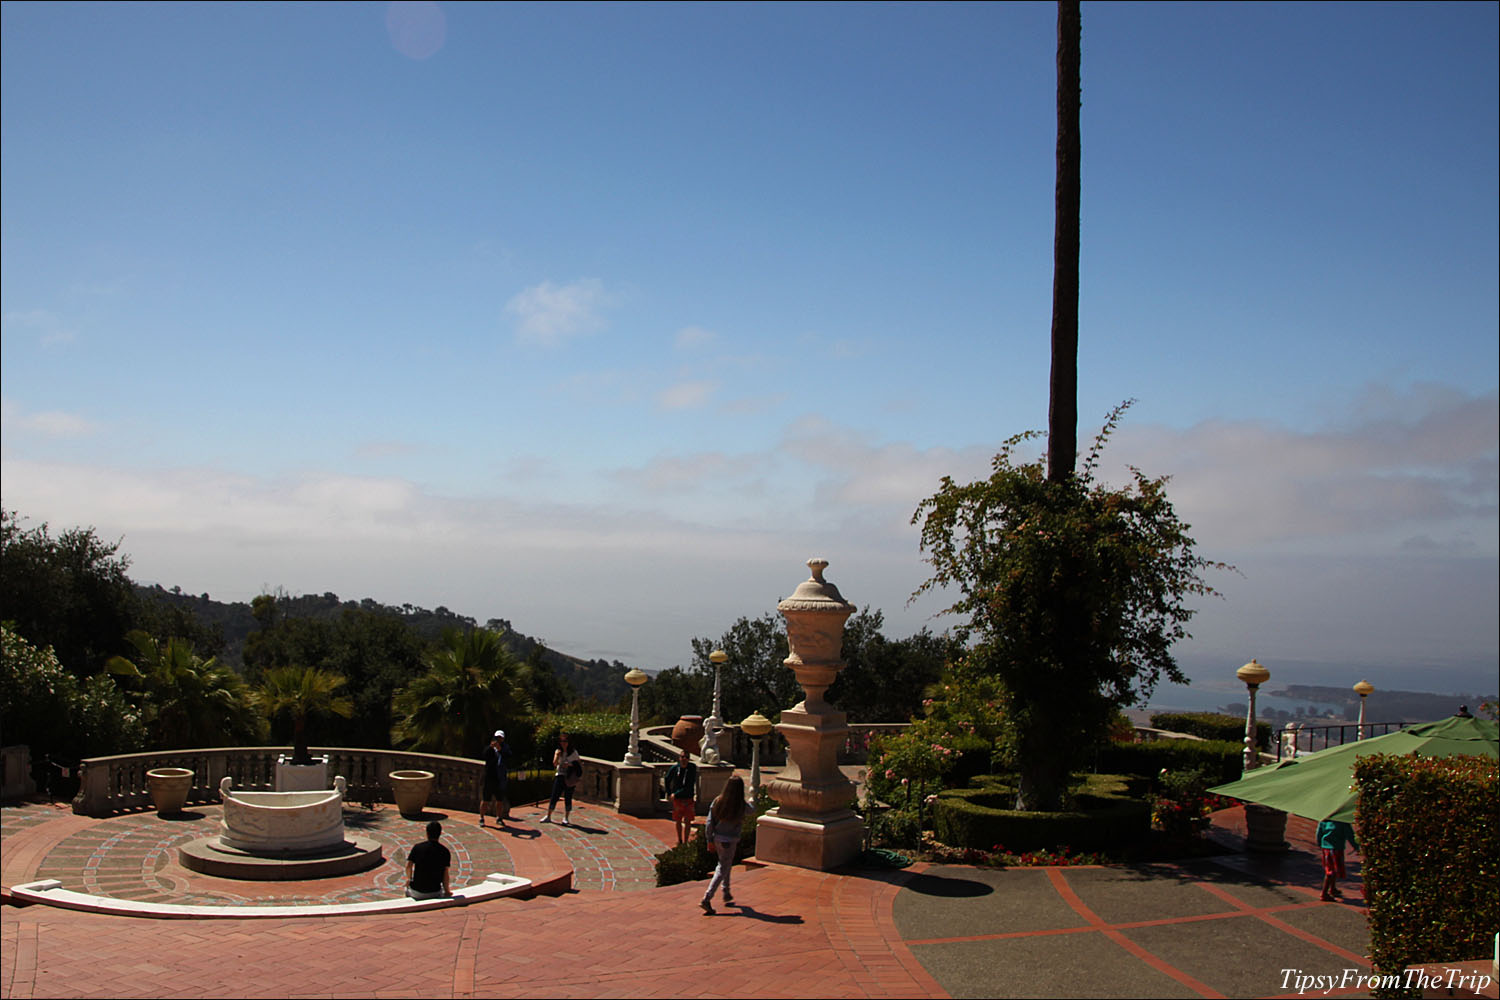 Views of the Pacific Ocean from Hearst Castle